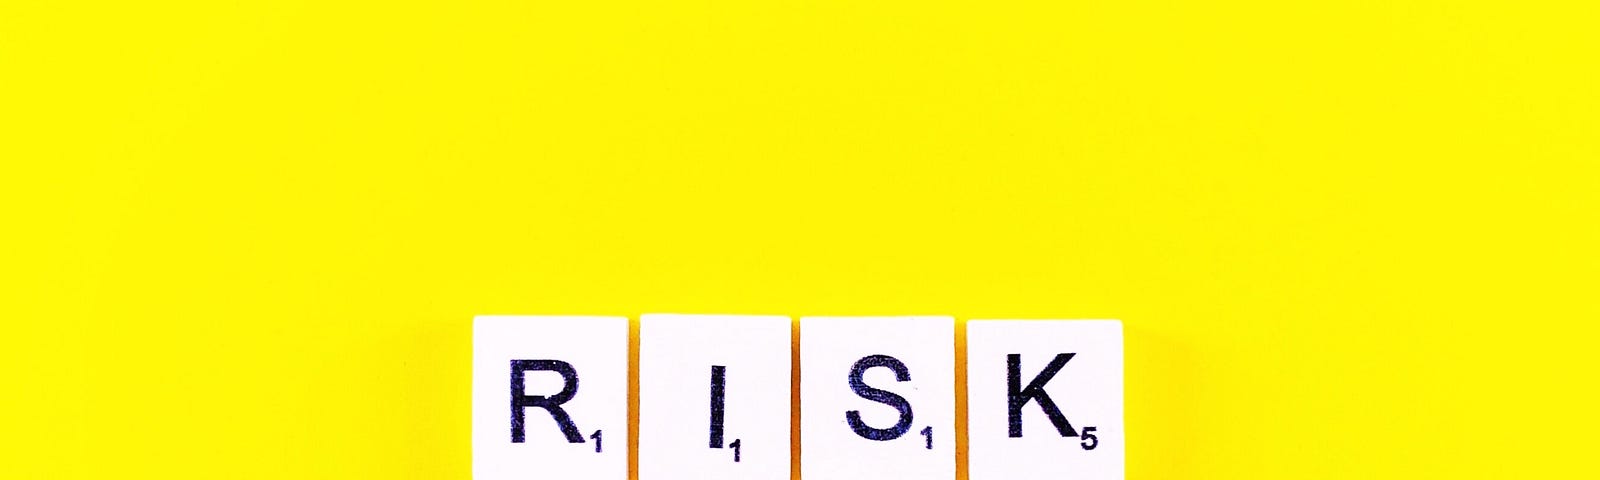 Risk spelled out in scrabble letters